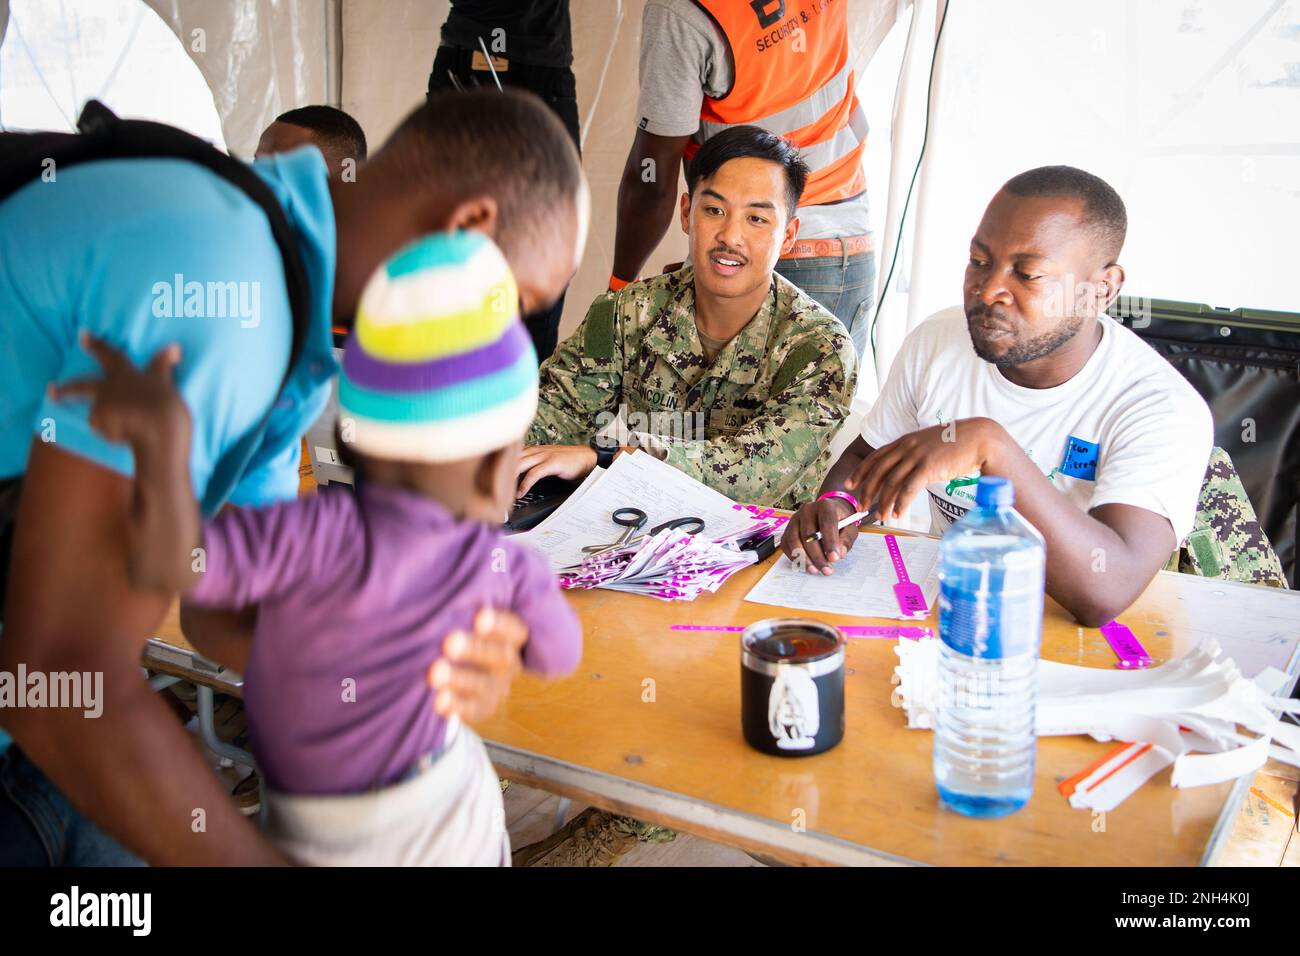 Hospital Corpsman First Class Aldrin Elgincolin, from Union City, California, assigned to the hospital ship USNS Comfort (T-AH 20), and Jean Daniel Pierre, a translator from Jeremie, Haiti check-in patients at the medical site in Jeremie, Haiti, during Continuing Promise 2022, Dec. 12, 2022. Comfort is deployed to U.S. 4th Fleet in support of CP22, a humanitarian assistance and goodwill mission conducting direct medical care, expeditionary veterinary care, and subject matter expert exchanges with five partner nations in the Caribbean, Central and South America. Stock Photo